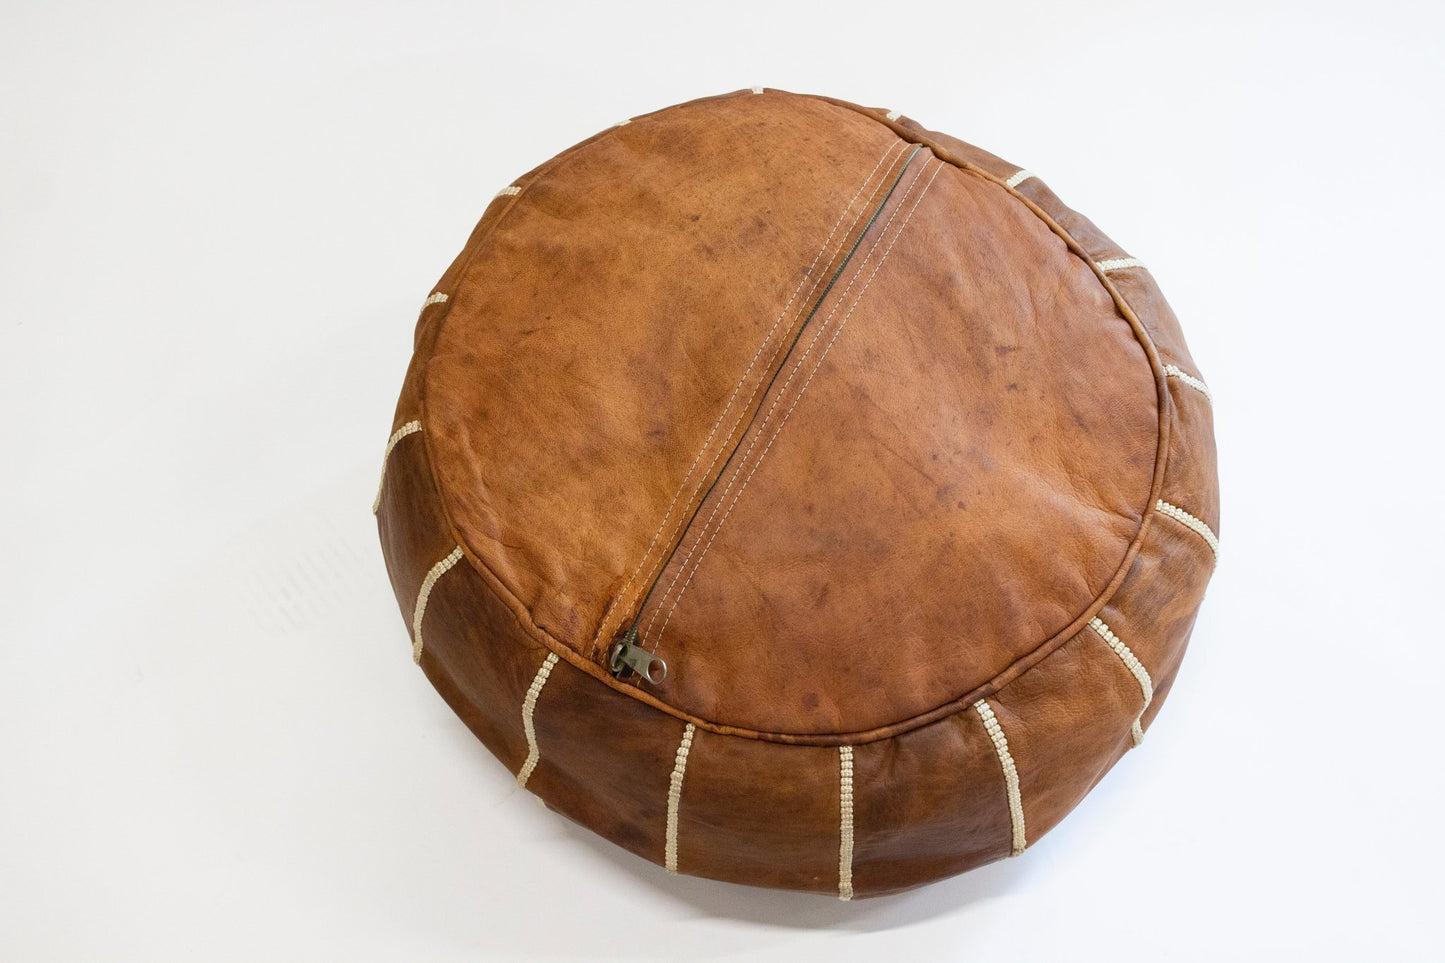 Moroccan Leather Pouf - CHYATEE